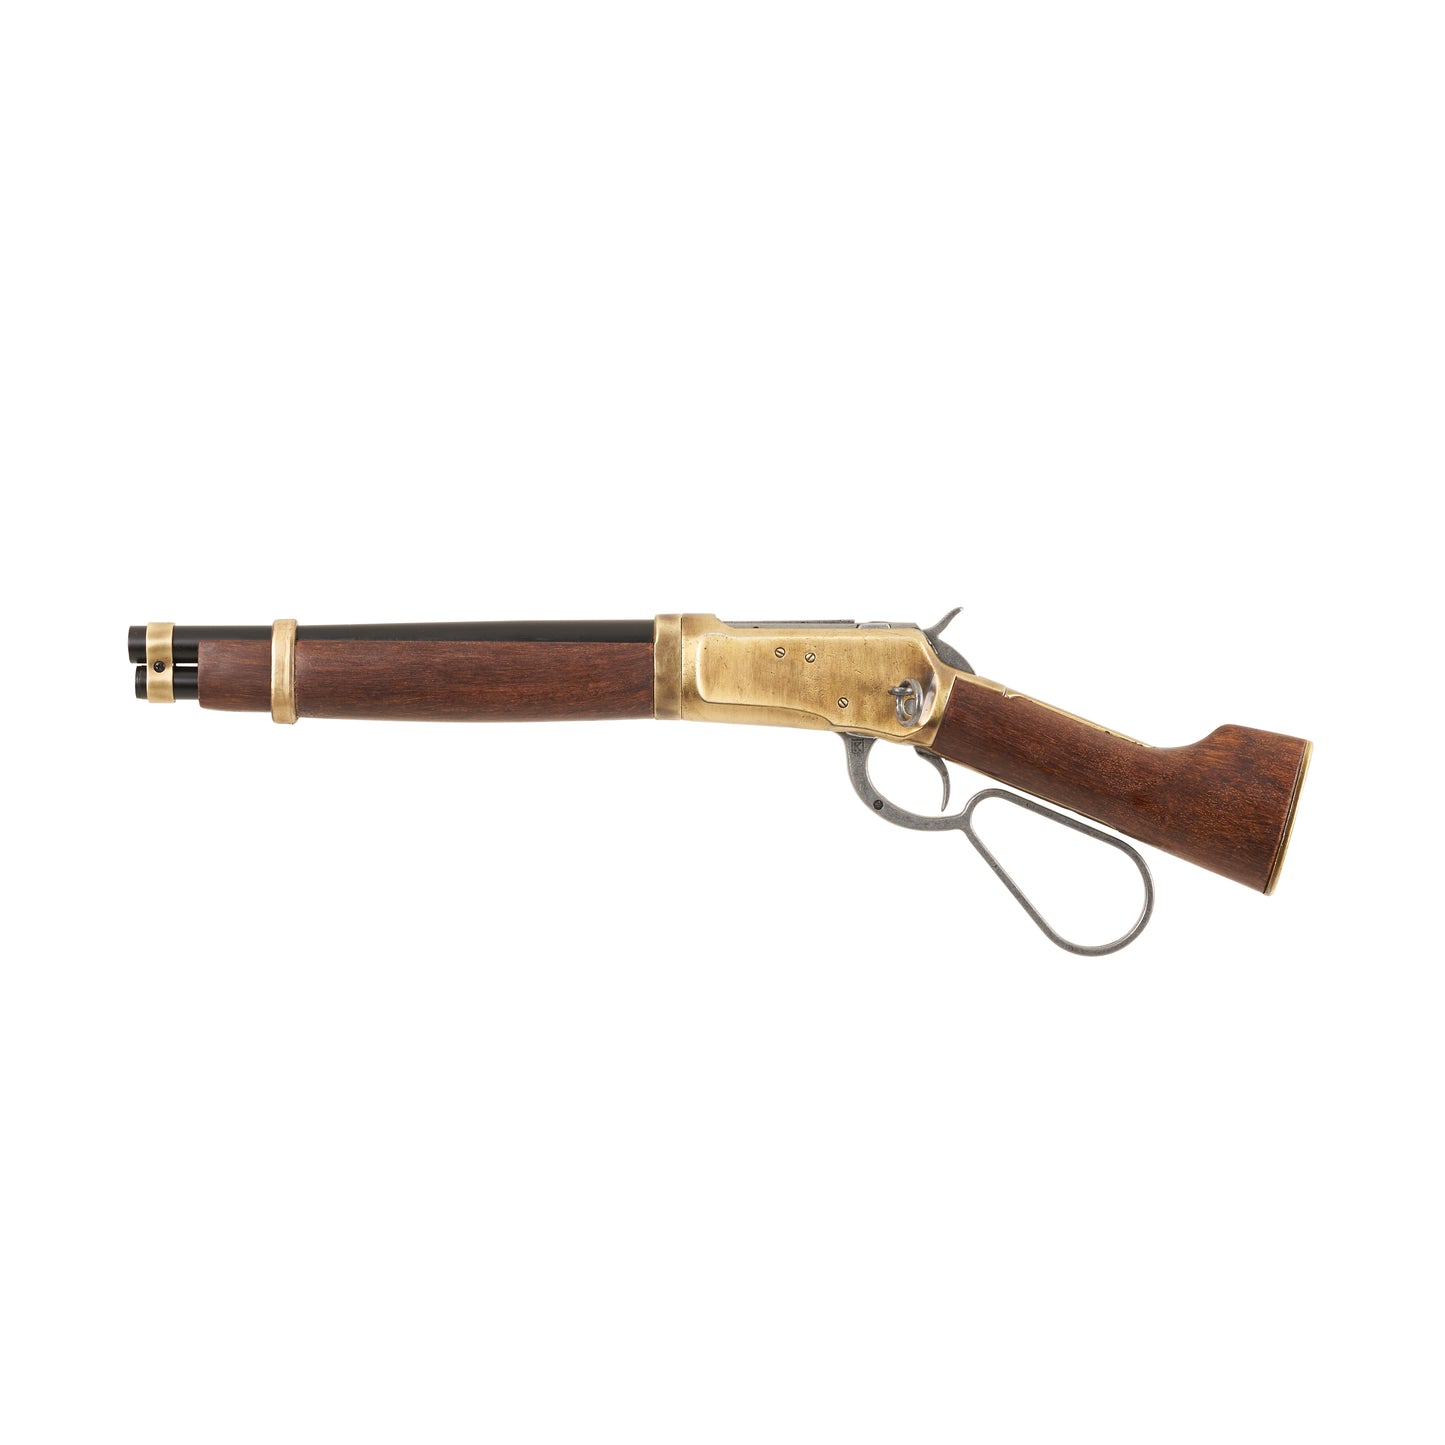 Left side view of Mare's Leg Rifle with gray loop lever handle, brass mechanism and trim, wood stock, and black barrel.